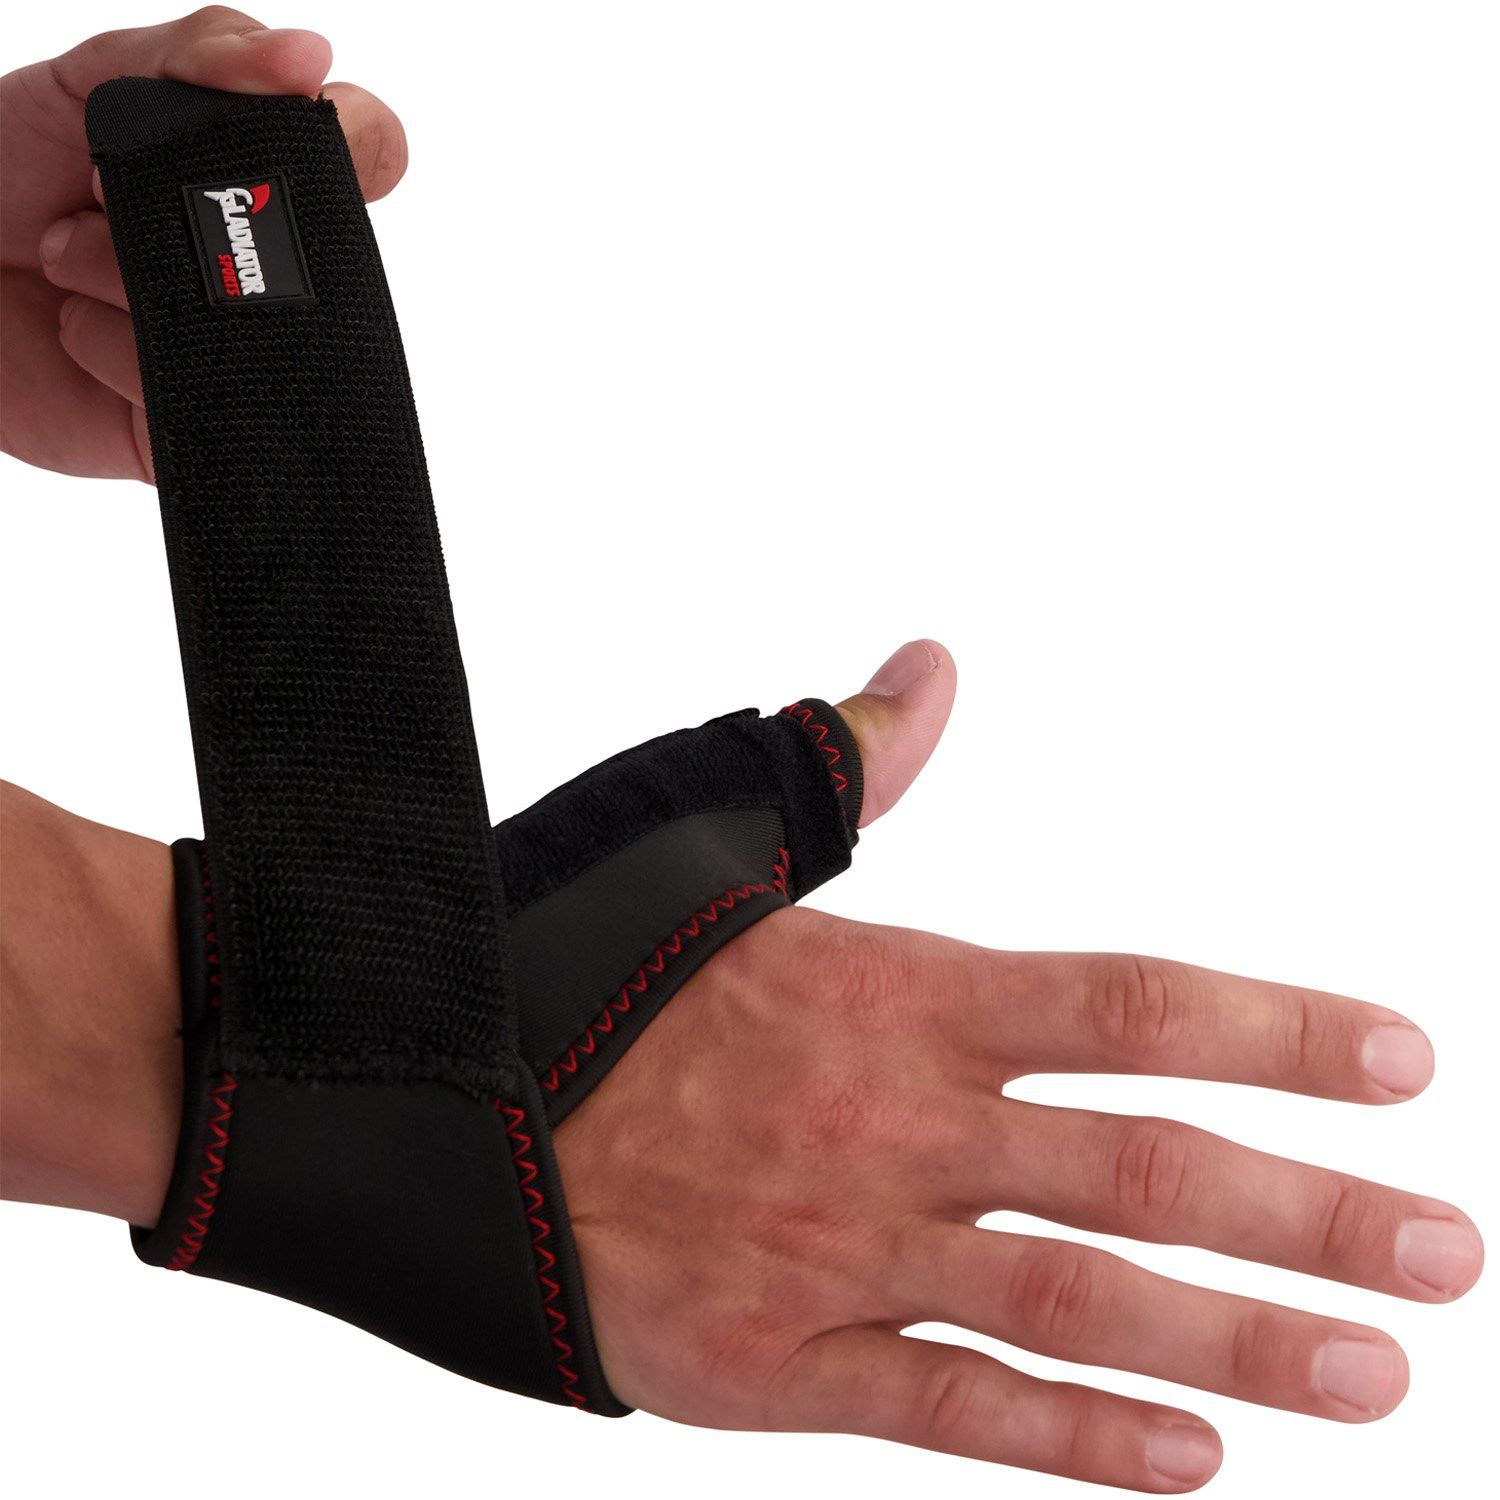 gladiator sports thumb wrist support being put on